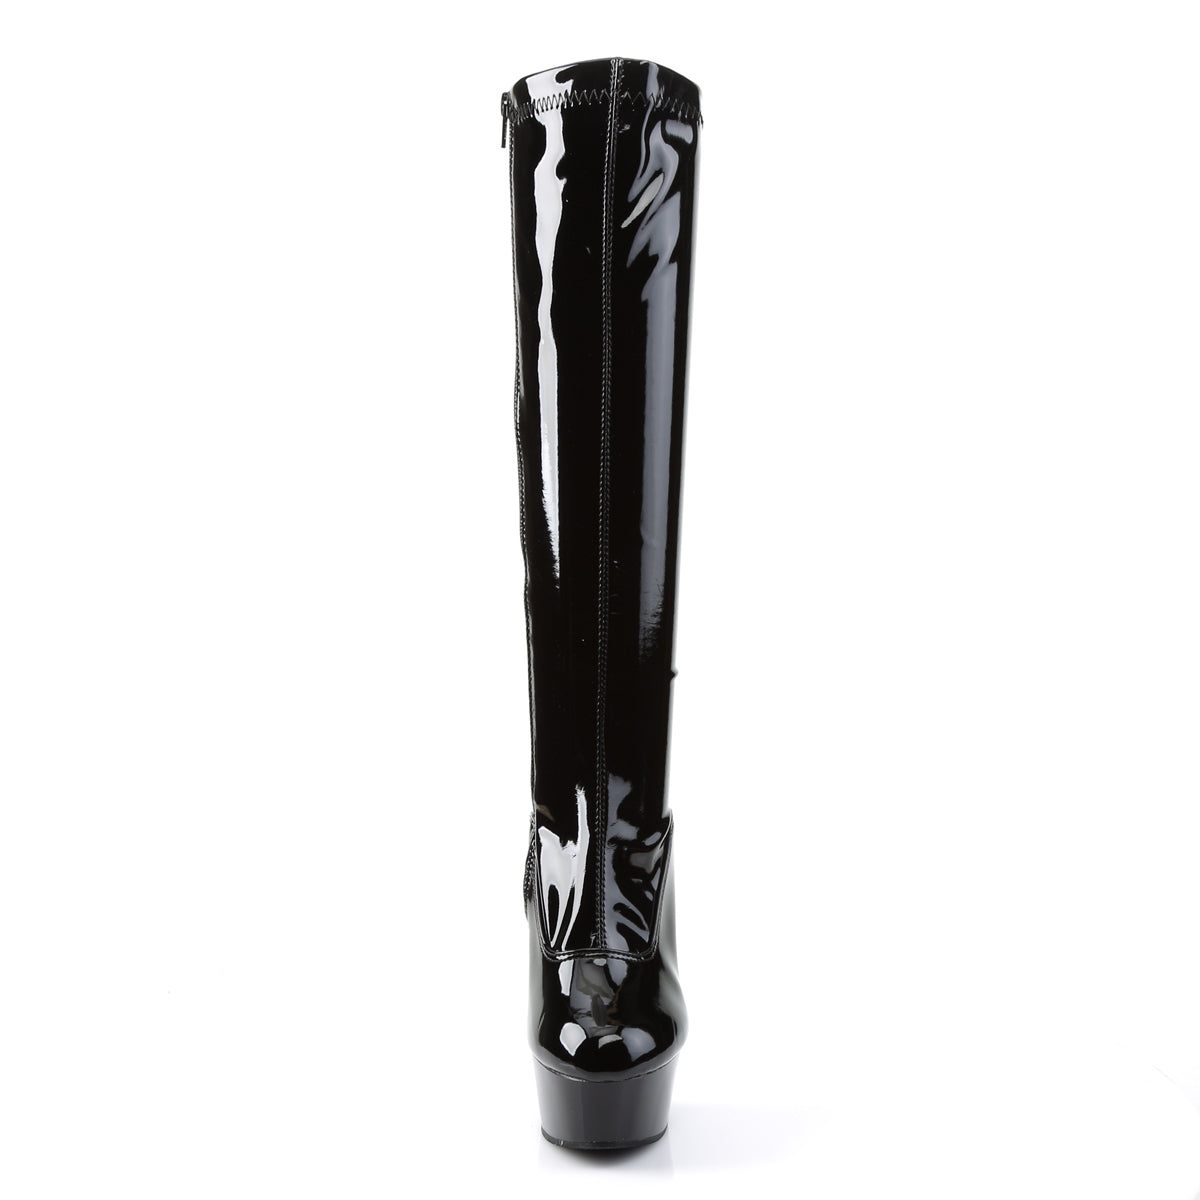 DELIGHT-2000 / B / M 6 "PLEASER FAST DELIVERY 24-48h 